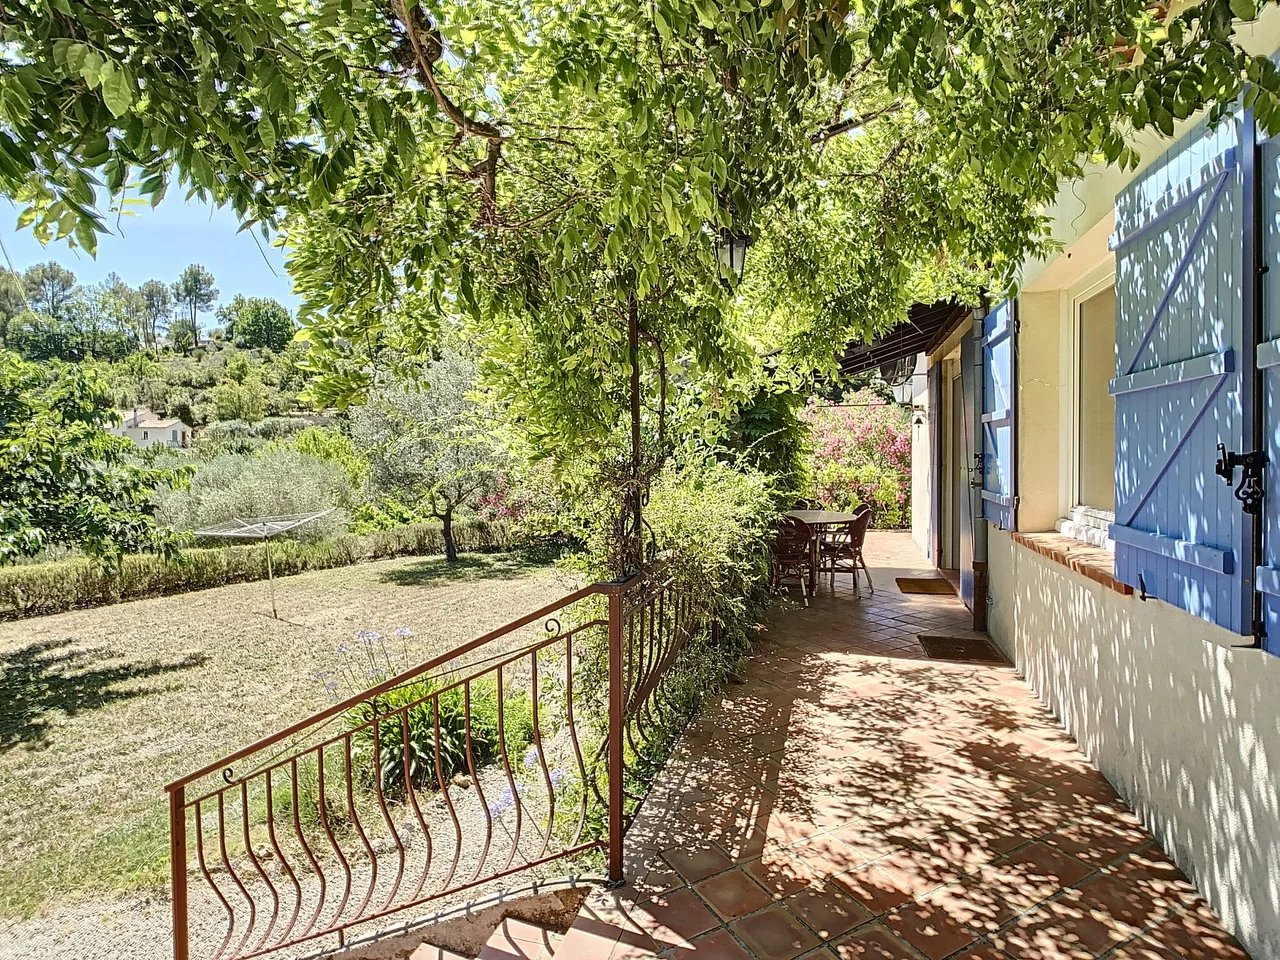 Cozy villa with pool, walking distance to the bakery shop